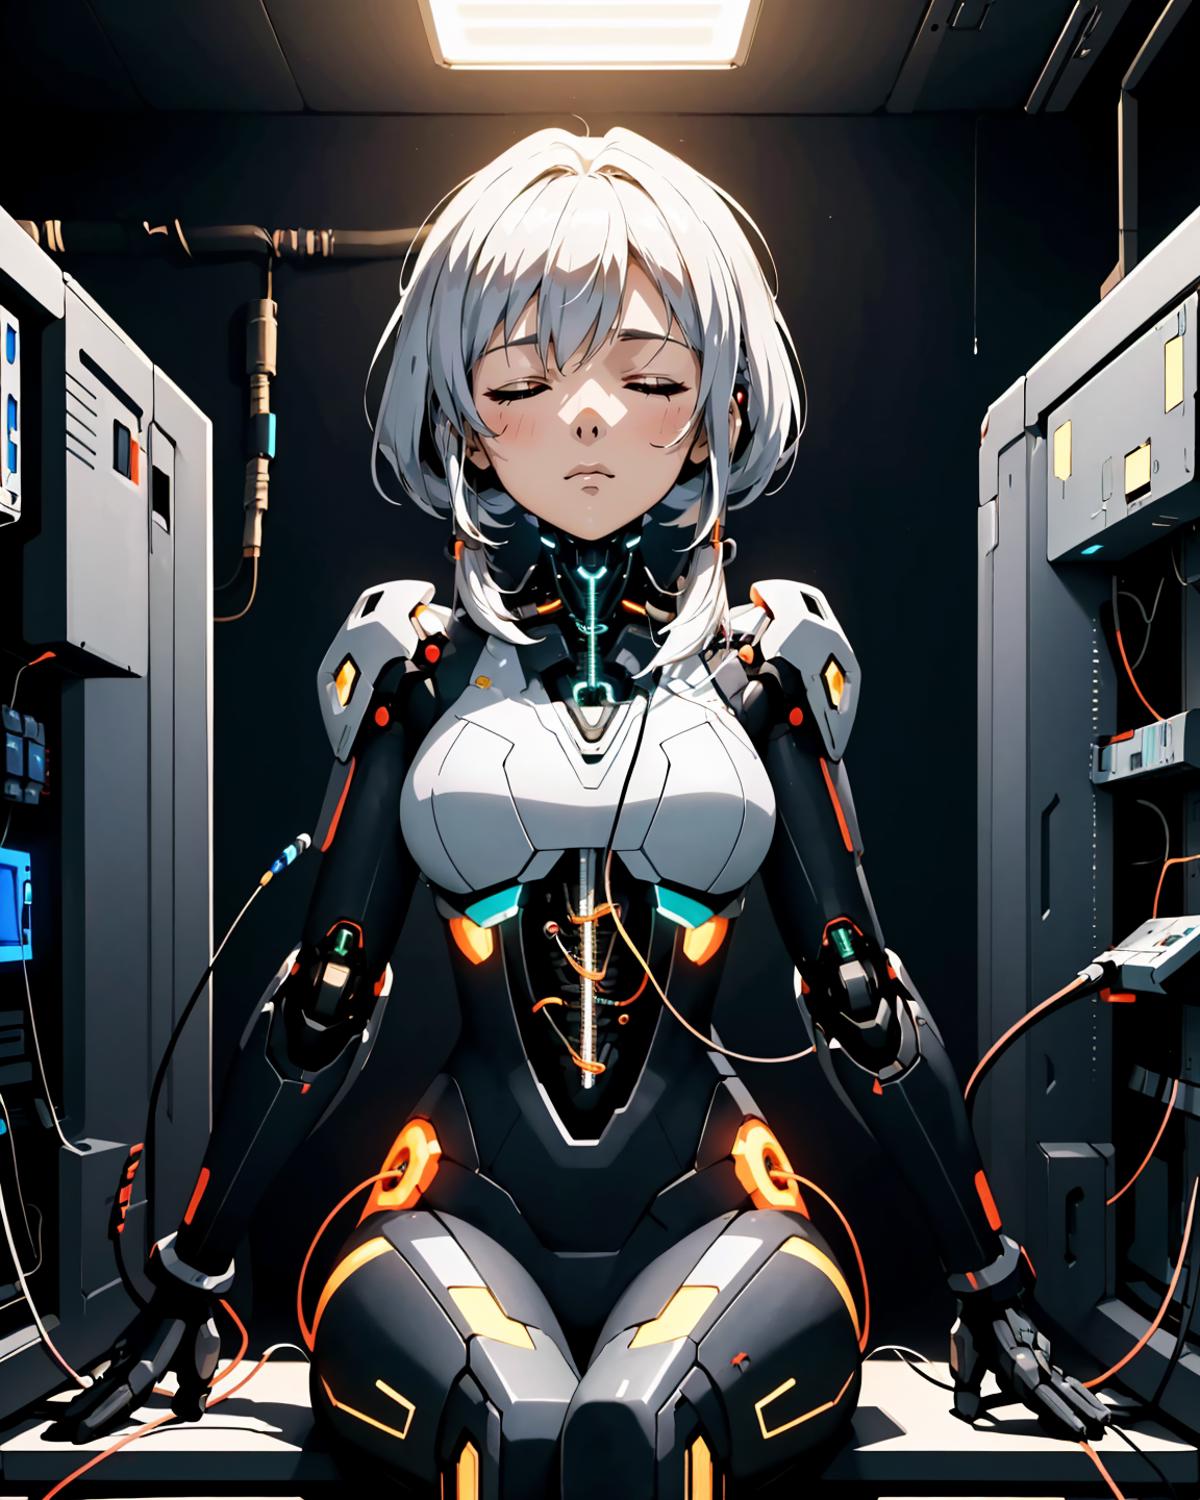 Anime-style robot girl with a plug in her ear, resting her head on her hand.